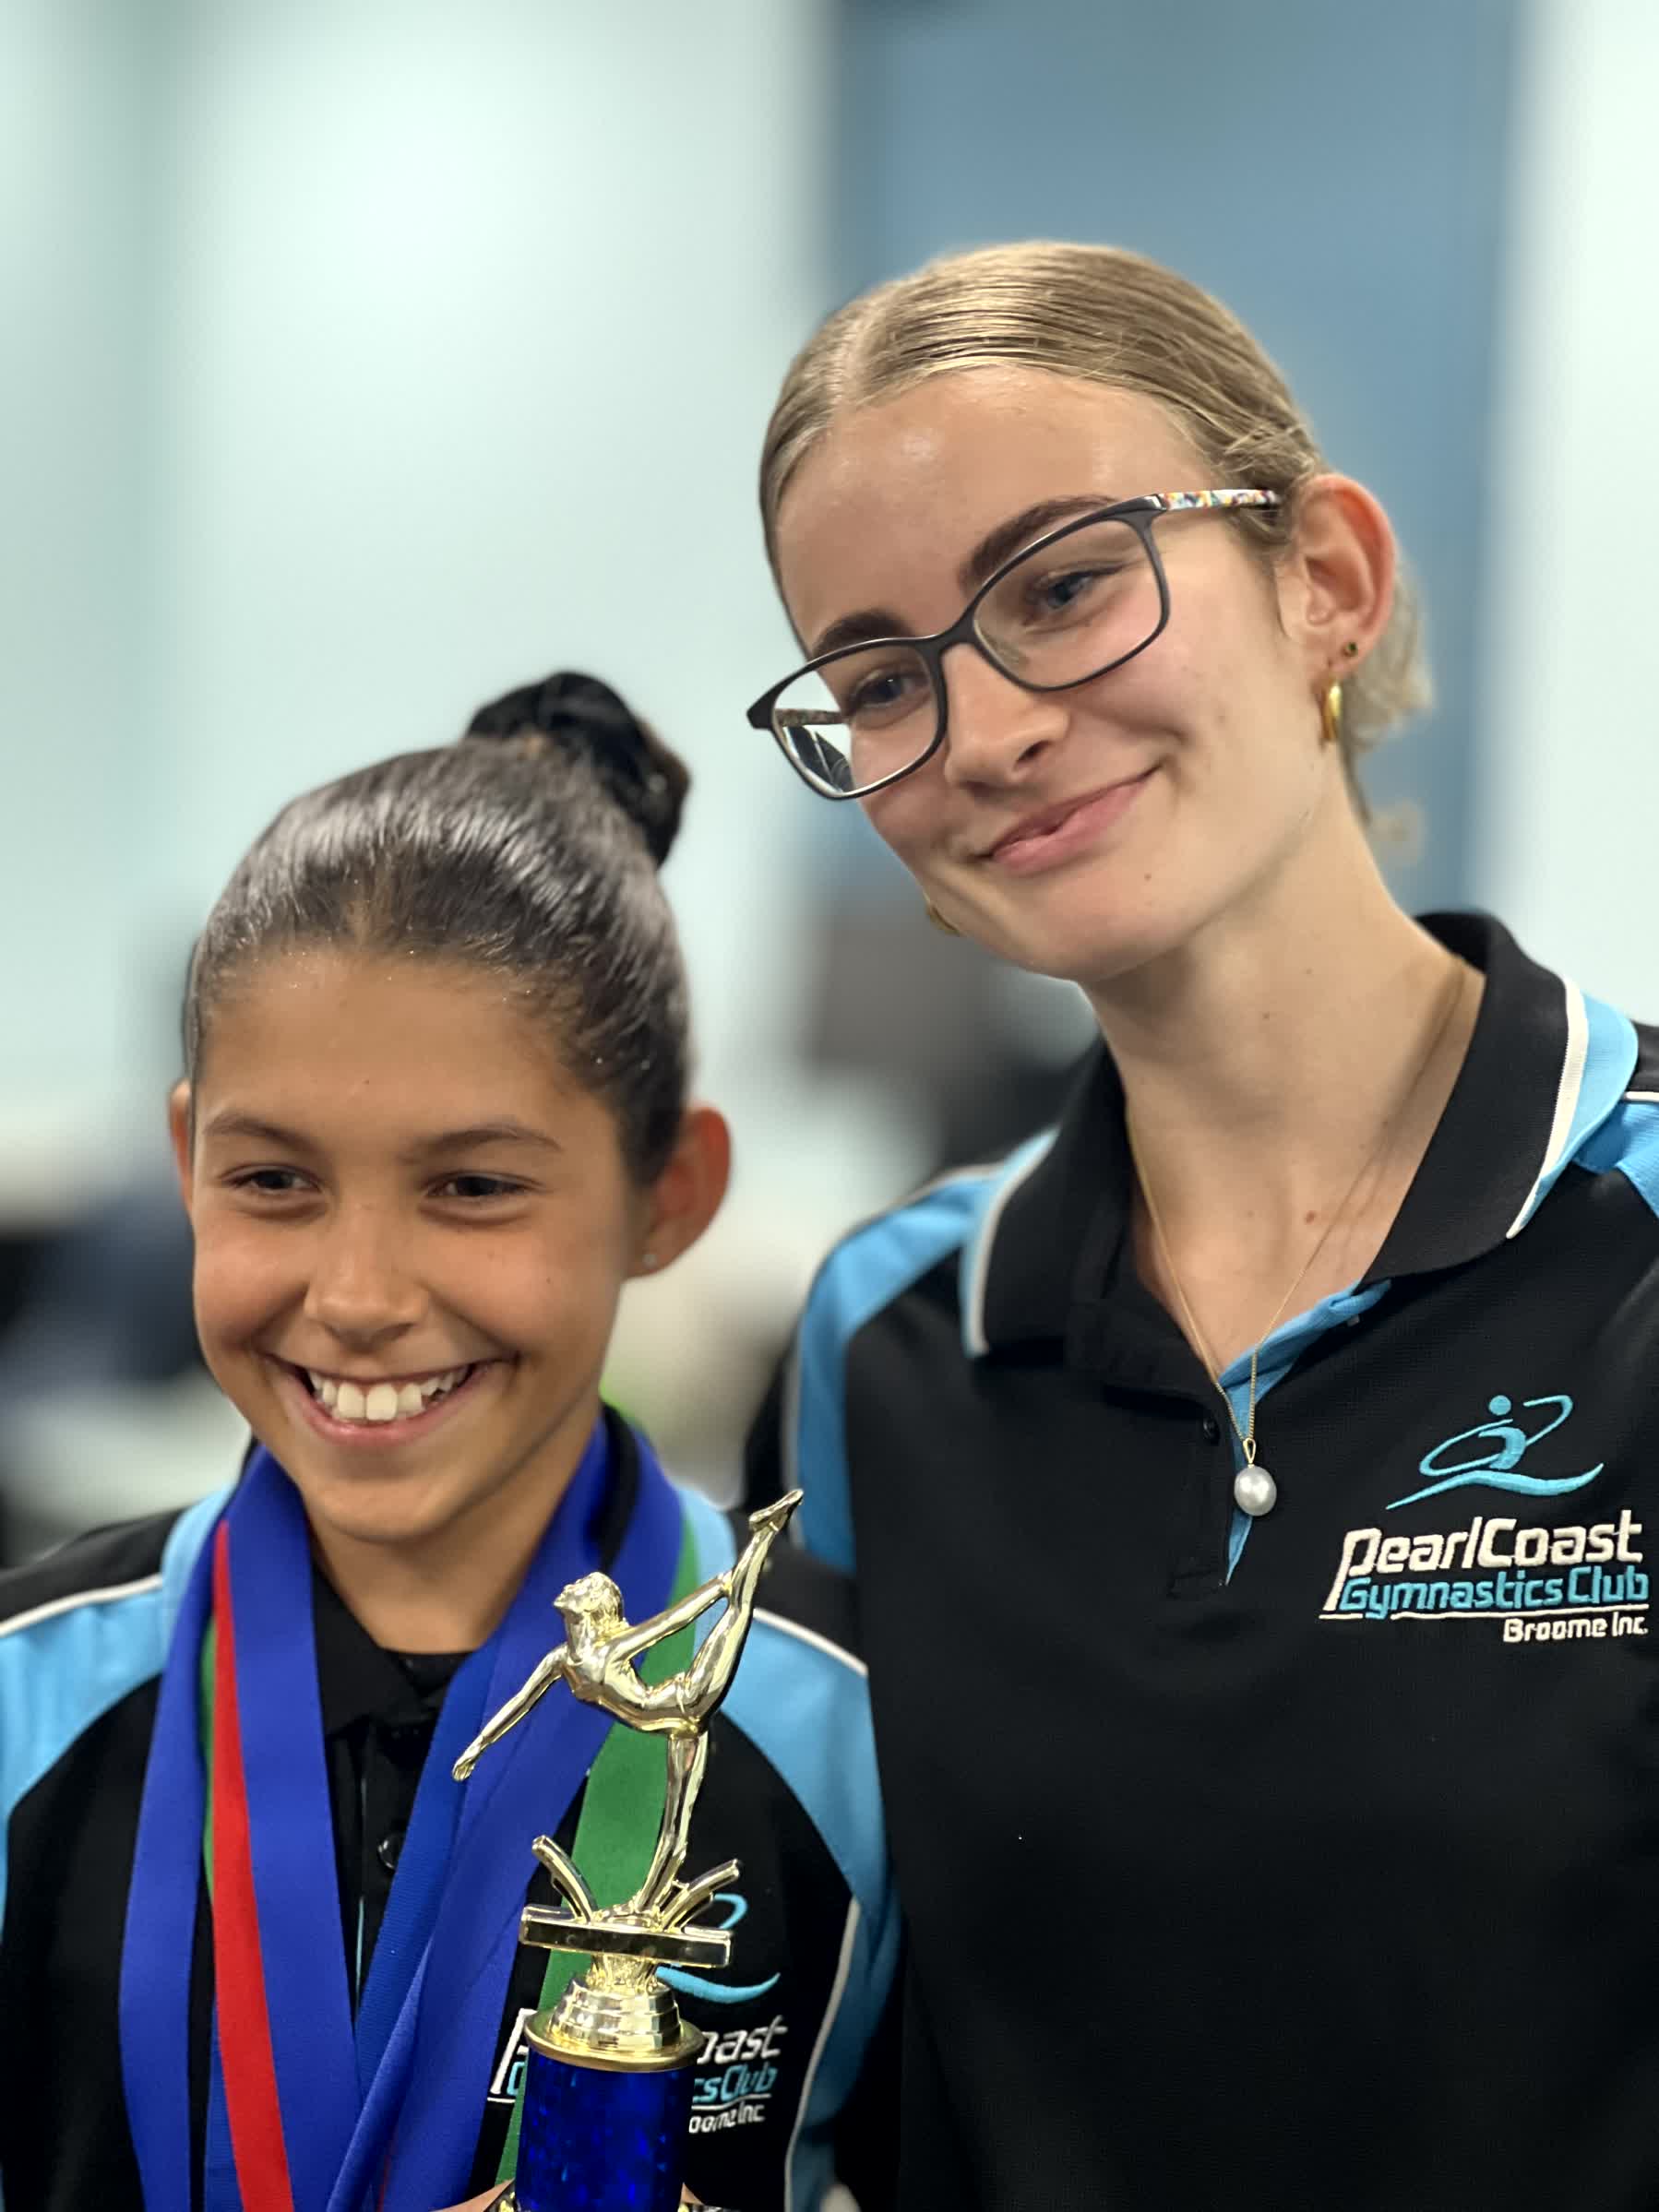 The Broome Challenge: A Spectacle of Talent at Pearl Coast Gymnastics Club